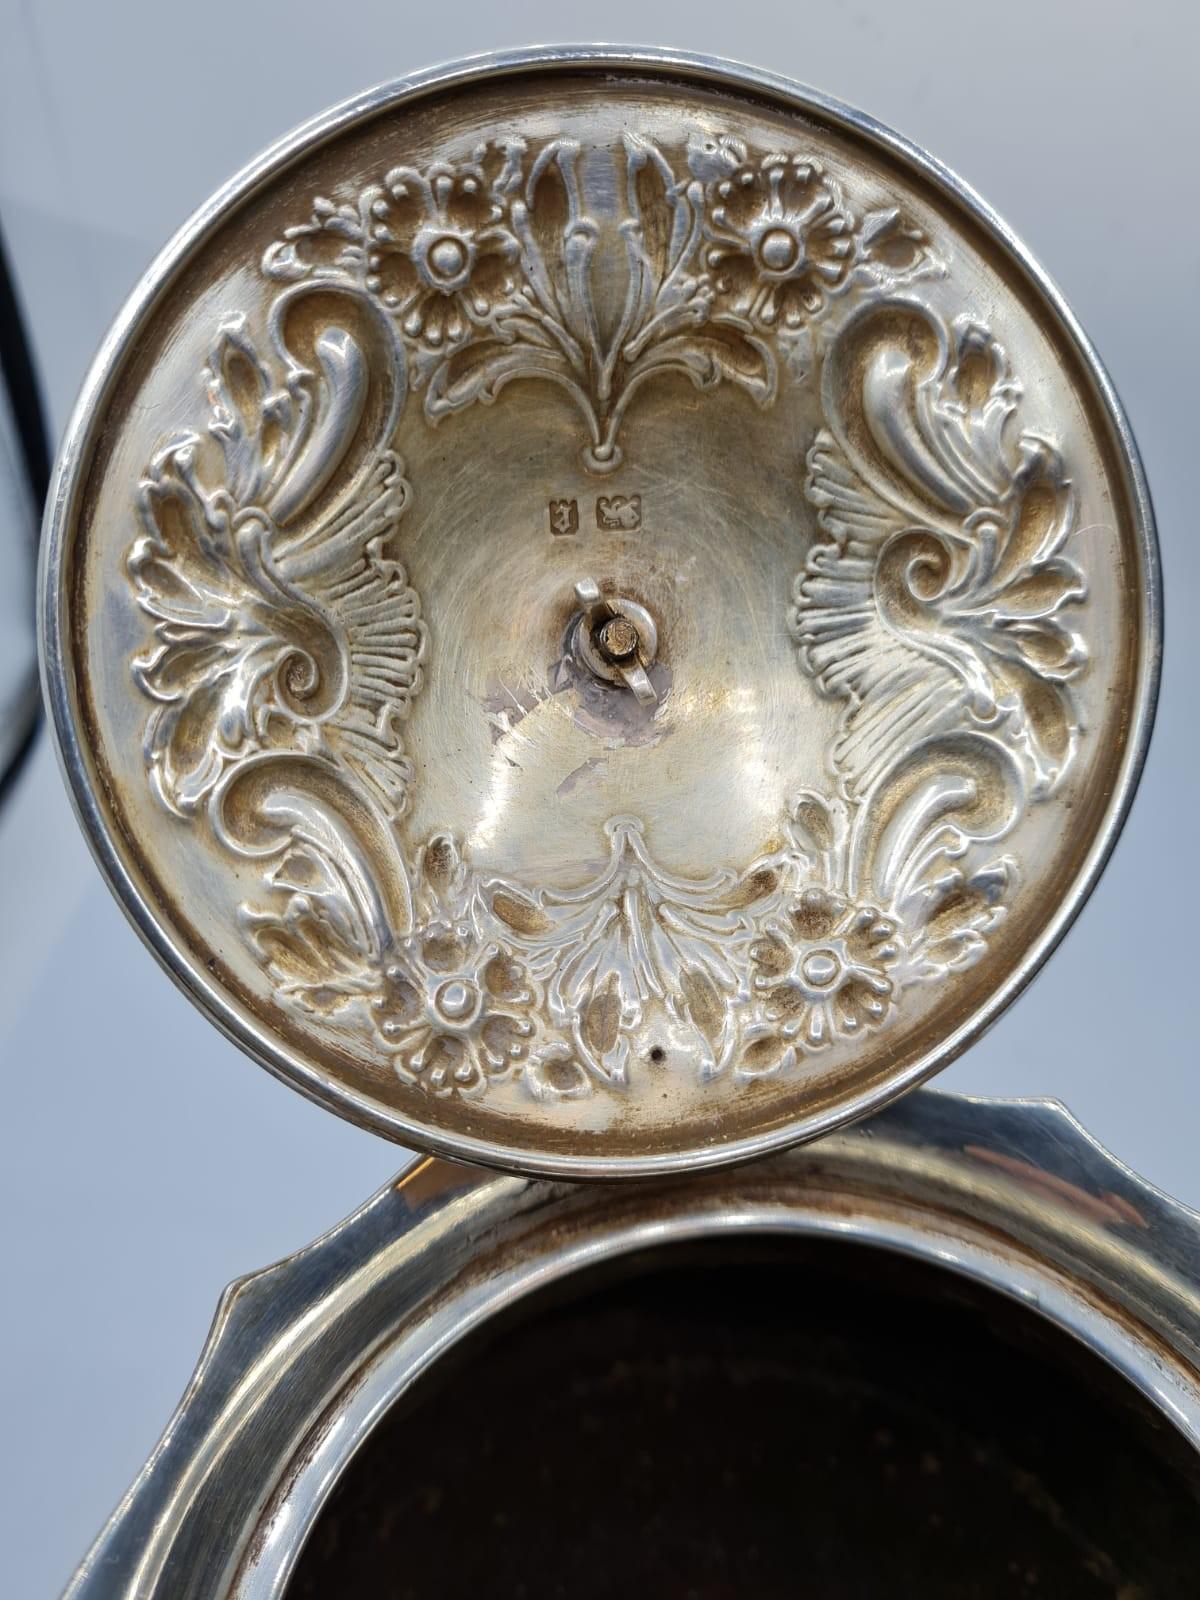 1920 Ornate Silver Teapot 766g - Image 8 of 8